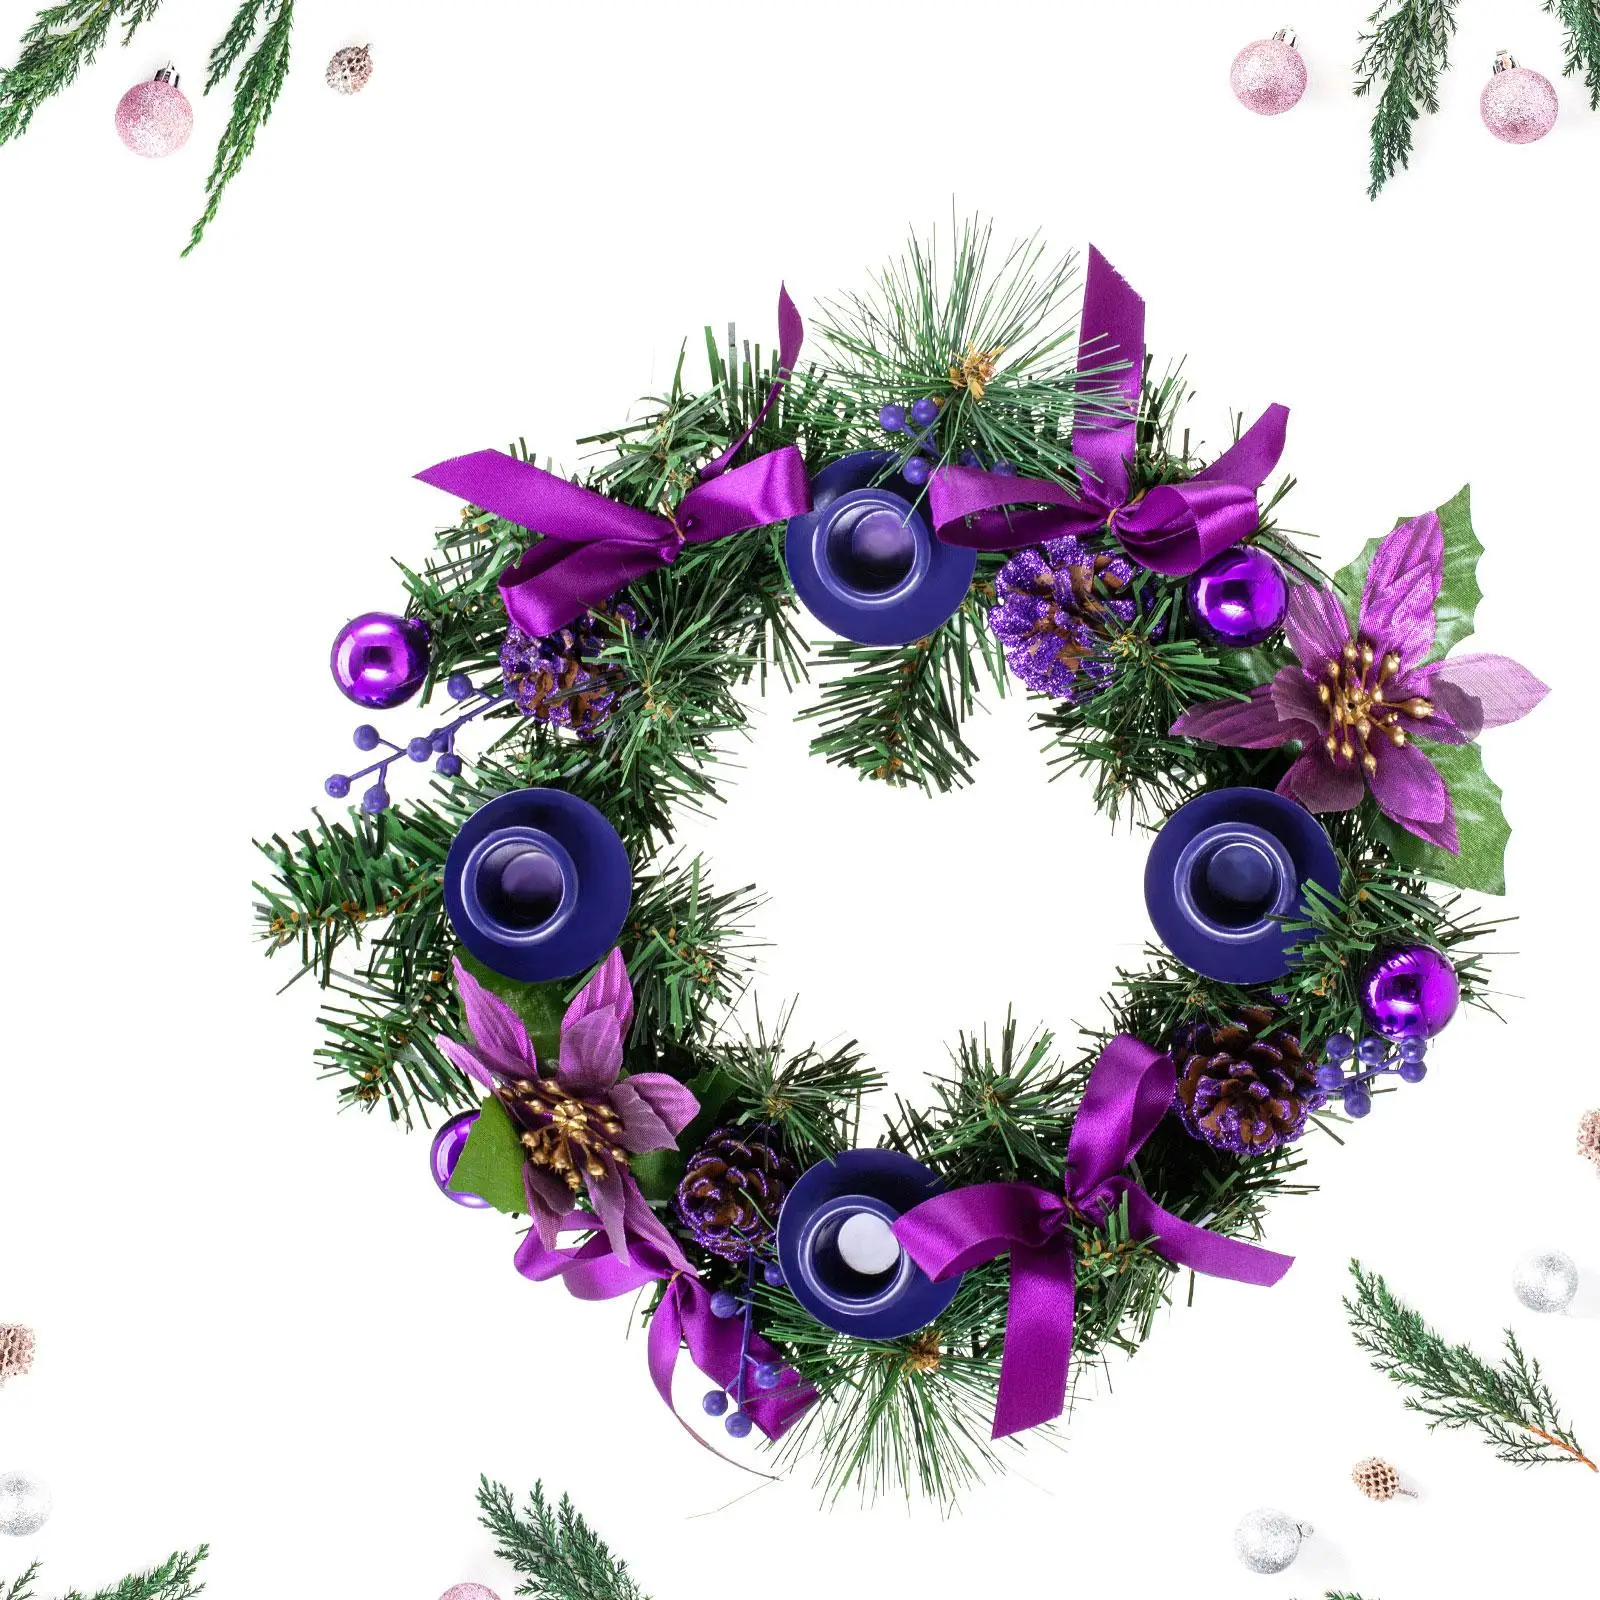 Modern Creative Garland Ornaments Decoration Centerpiece Wall Hanging Flower Wreath for Window Farmhouse Holiday Banquet Table